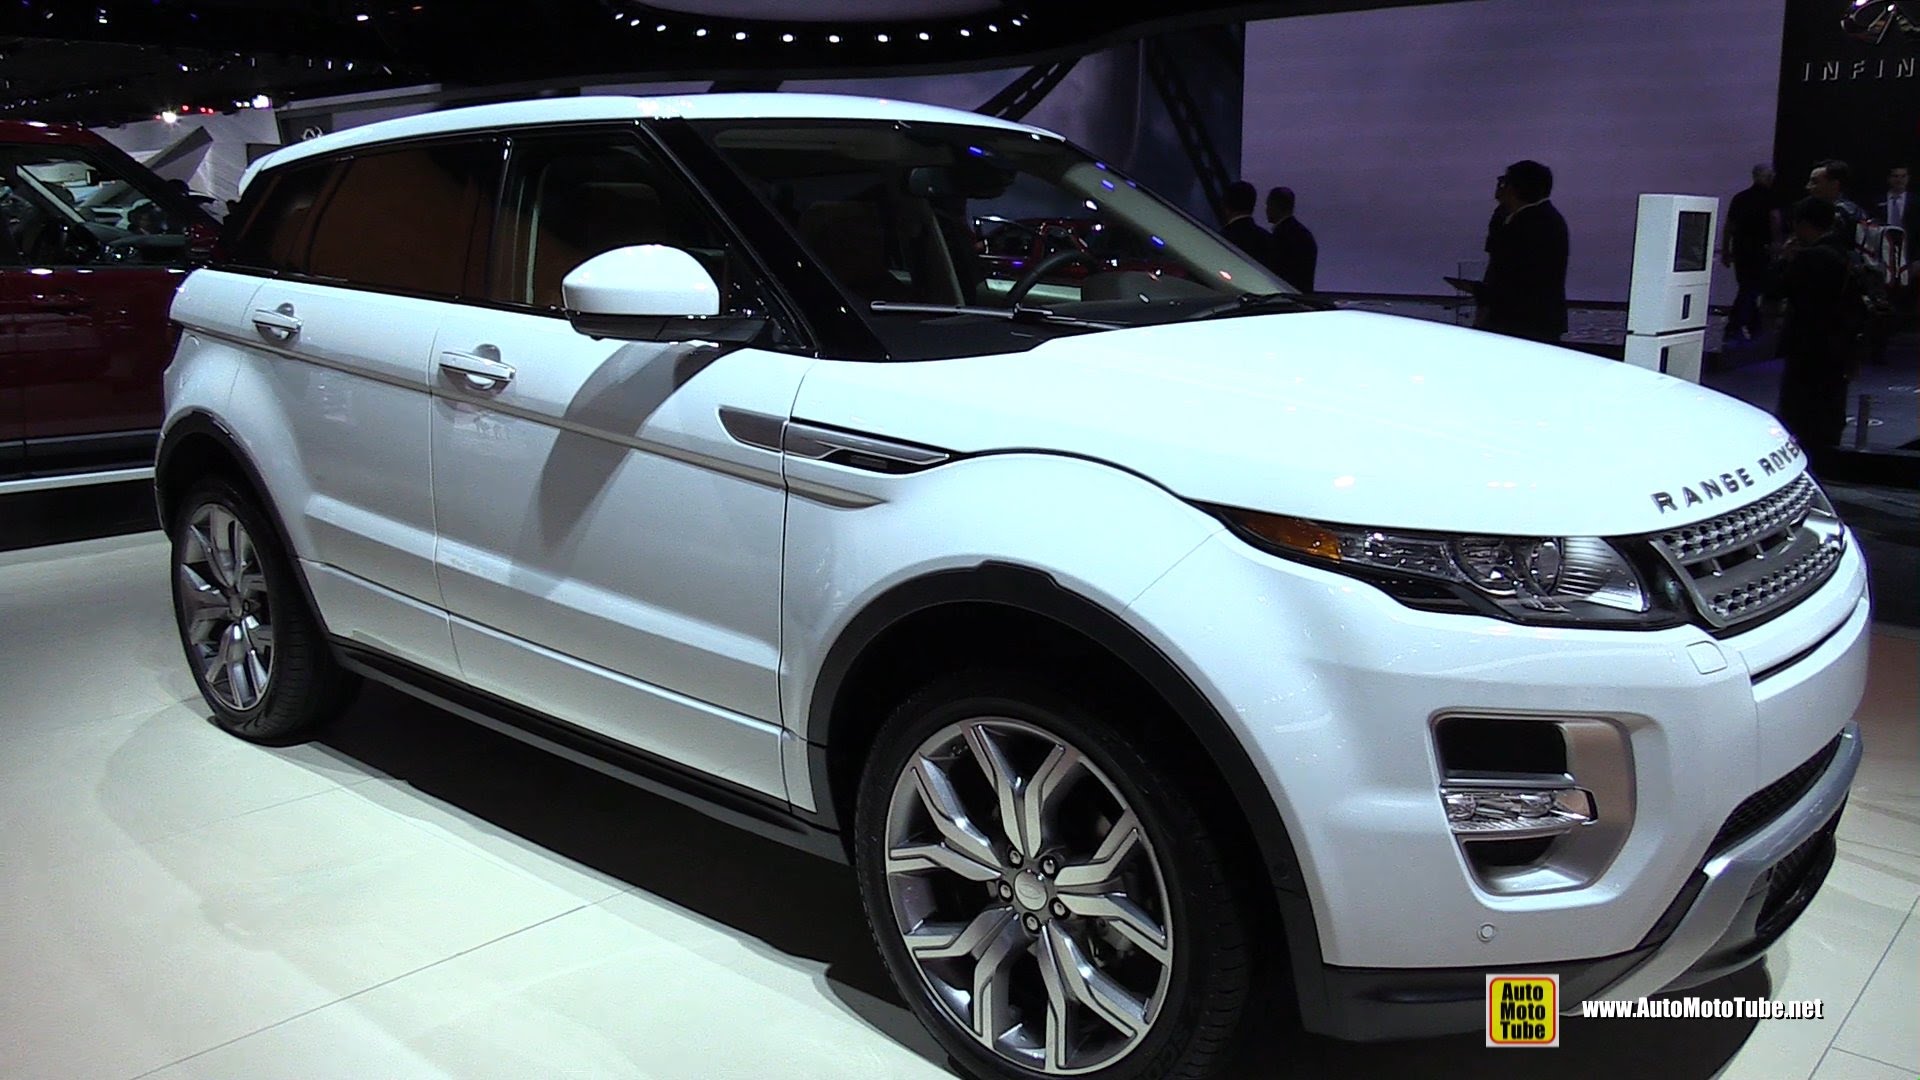 Nice Images Collection: 2015 Range Rover Evoque Autobiography Desktop Wallpapers